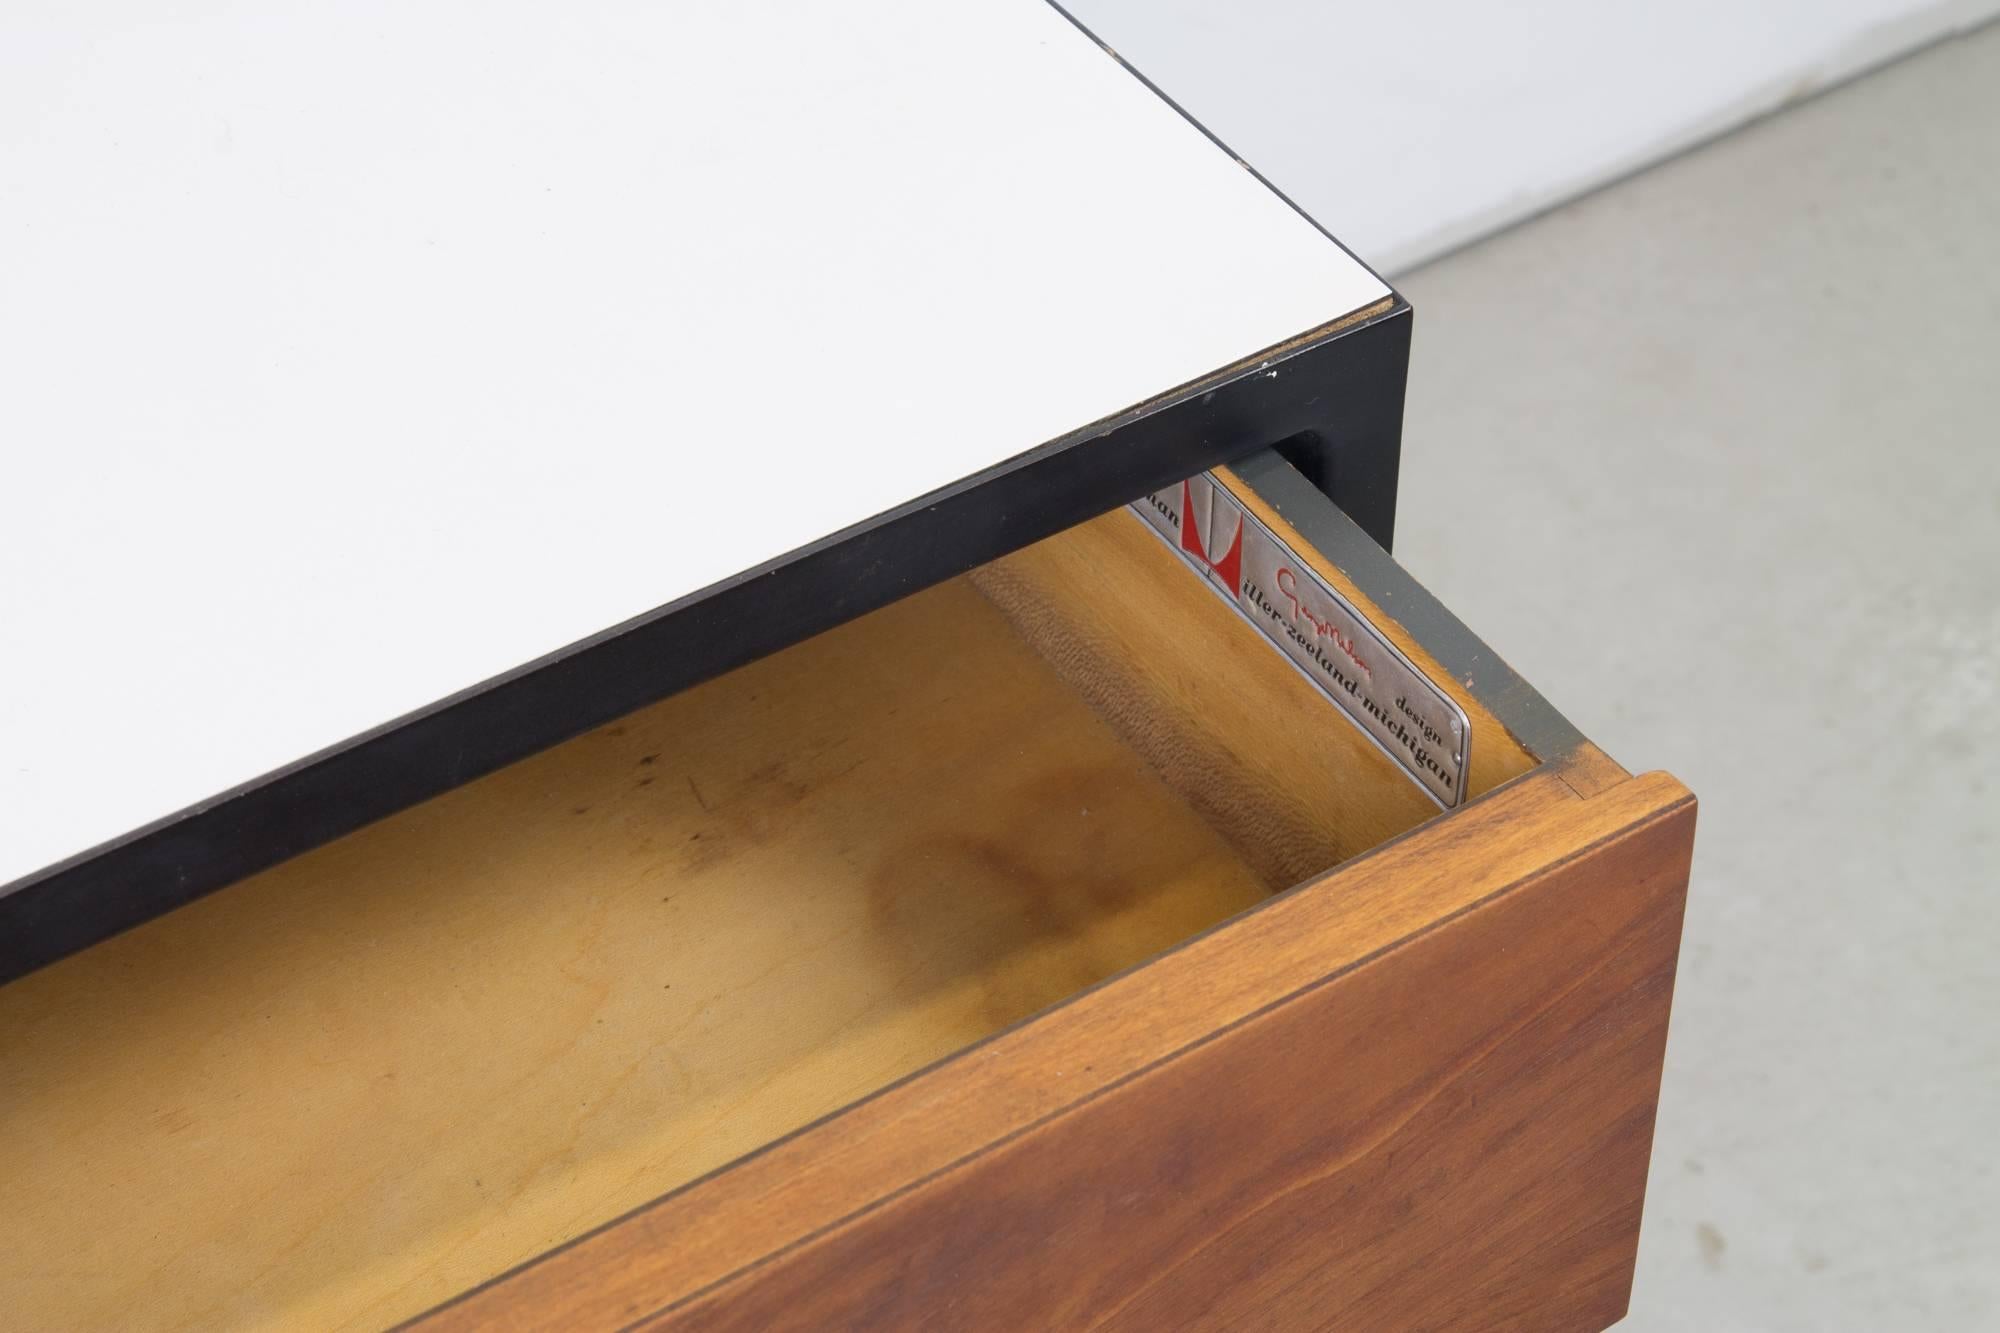 A compact nightstand by George Nelson as part of the steel frame line for Herman Miller. This nightstand features an external frame of blackened steel, with three walnut front drawers, a lower walnut shelf, chromed pulls and a white laminate top.